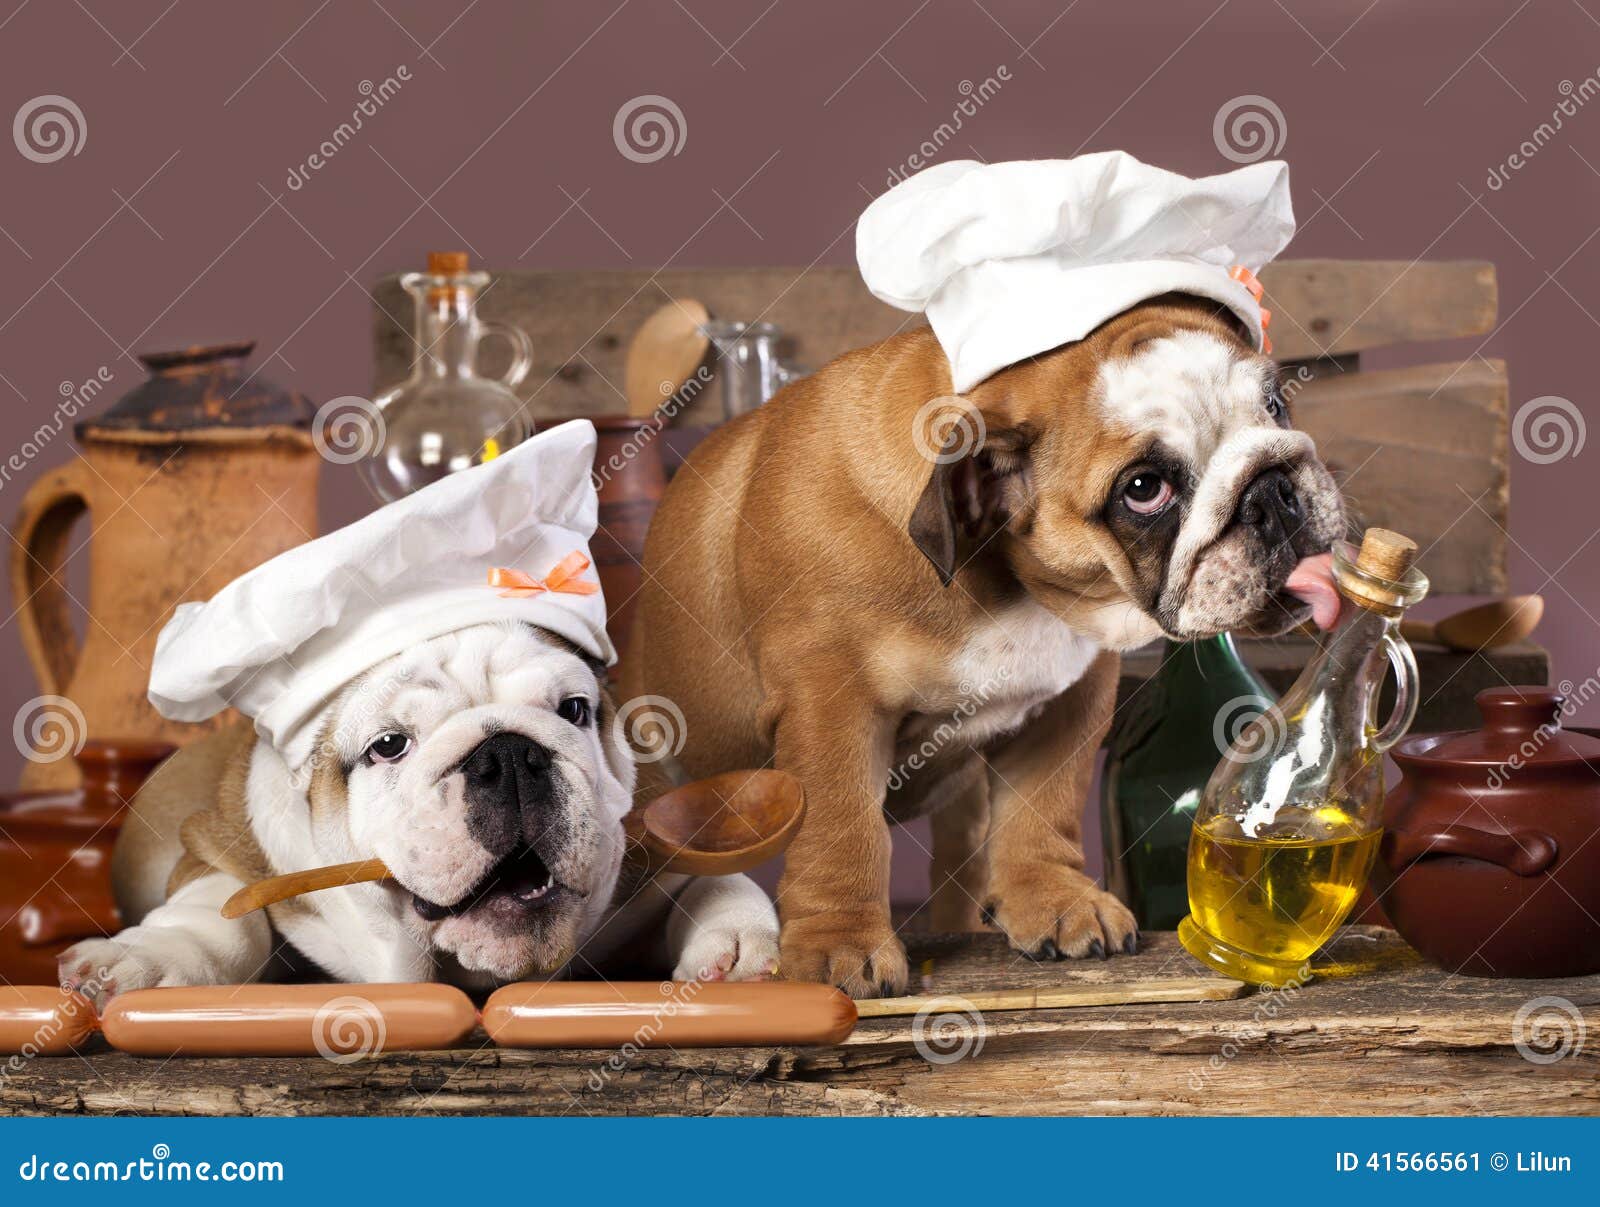 Puppies in chef s hat stock image. Image of face, dressed - 41566561